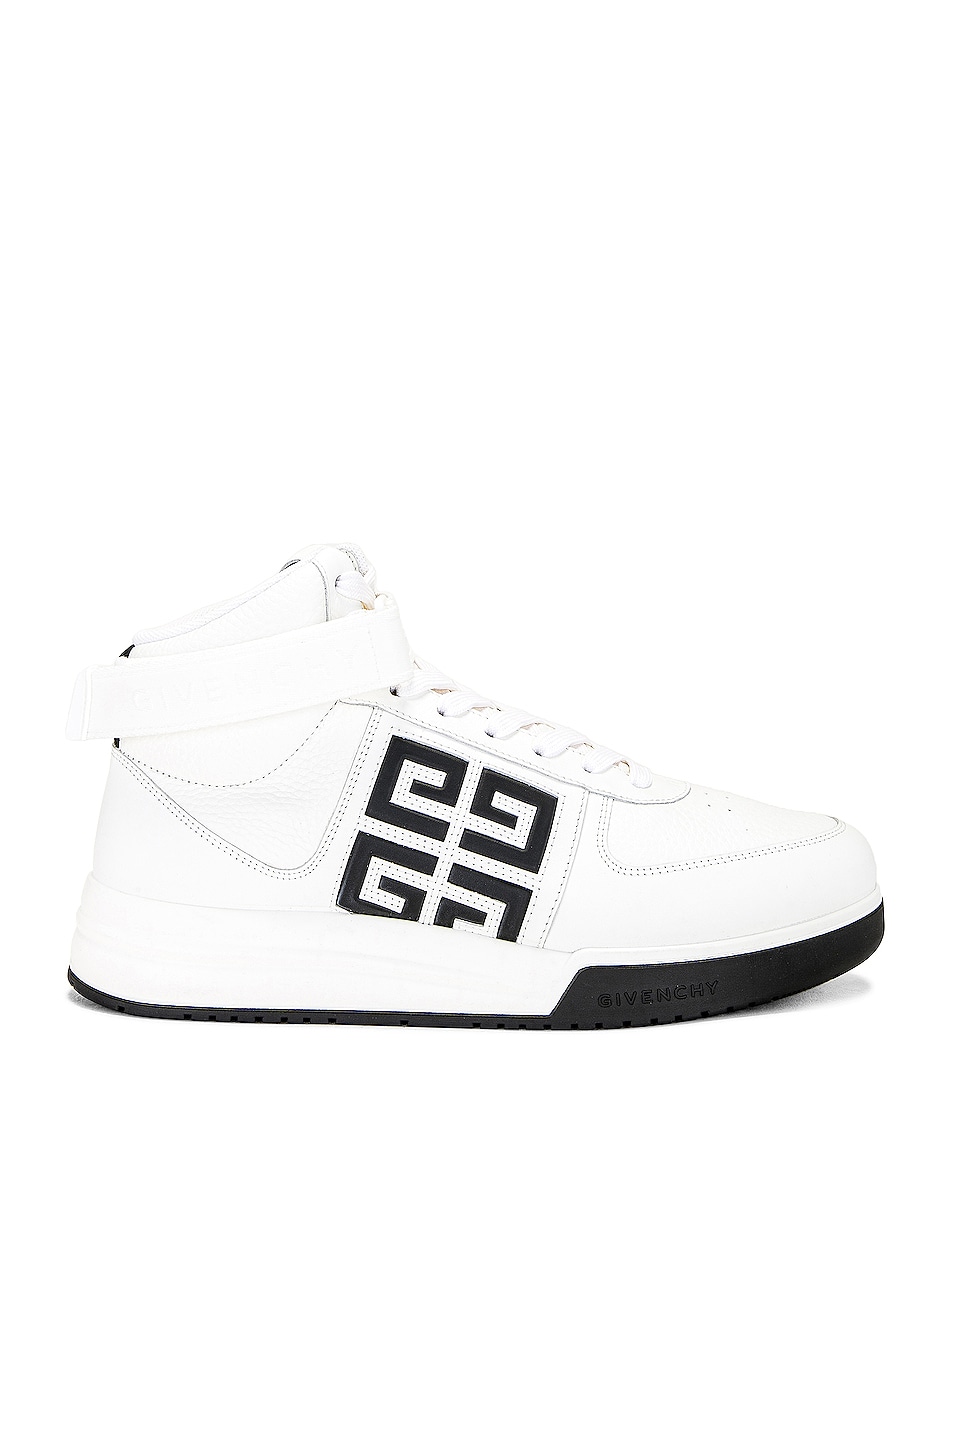 Image 1 of Givenchy G4 High Top Sneaker In White & Black in White & Black